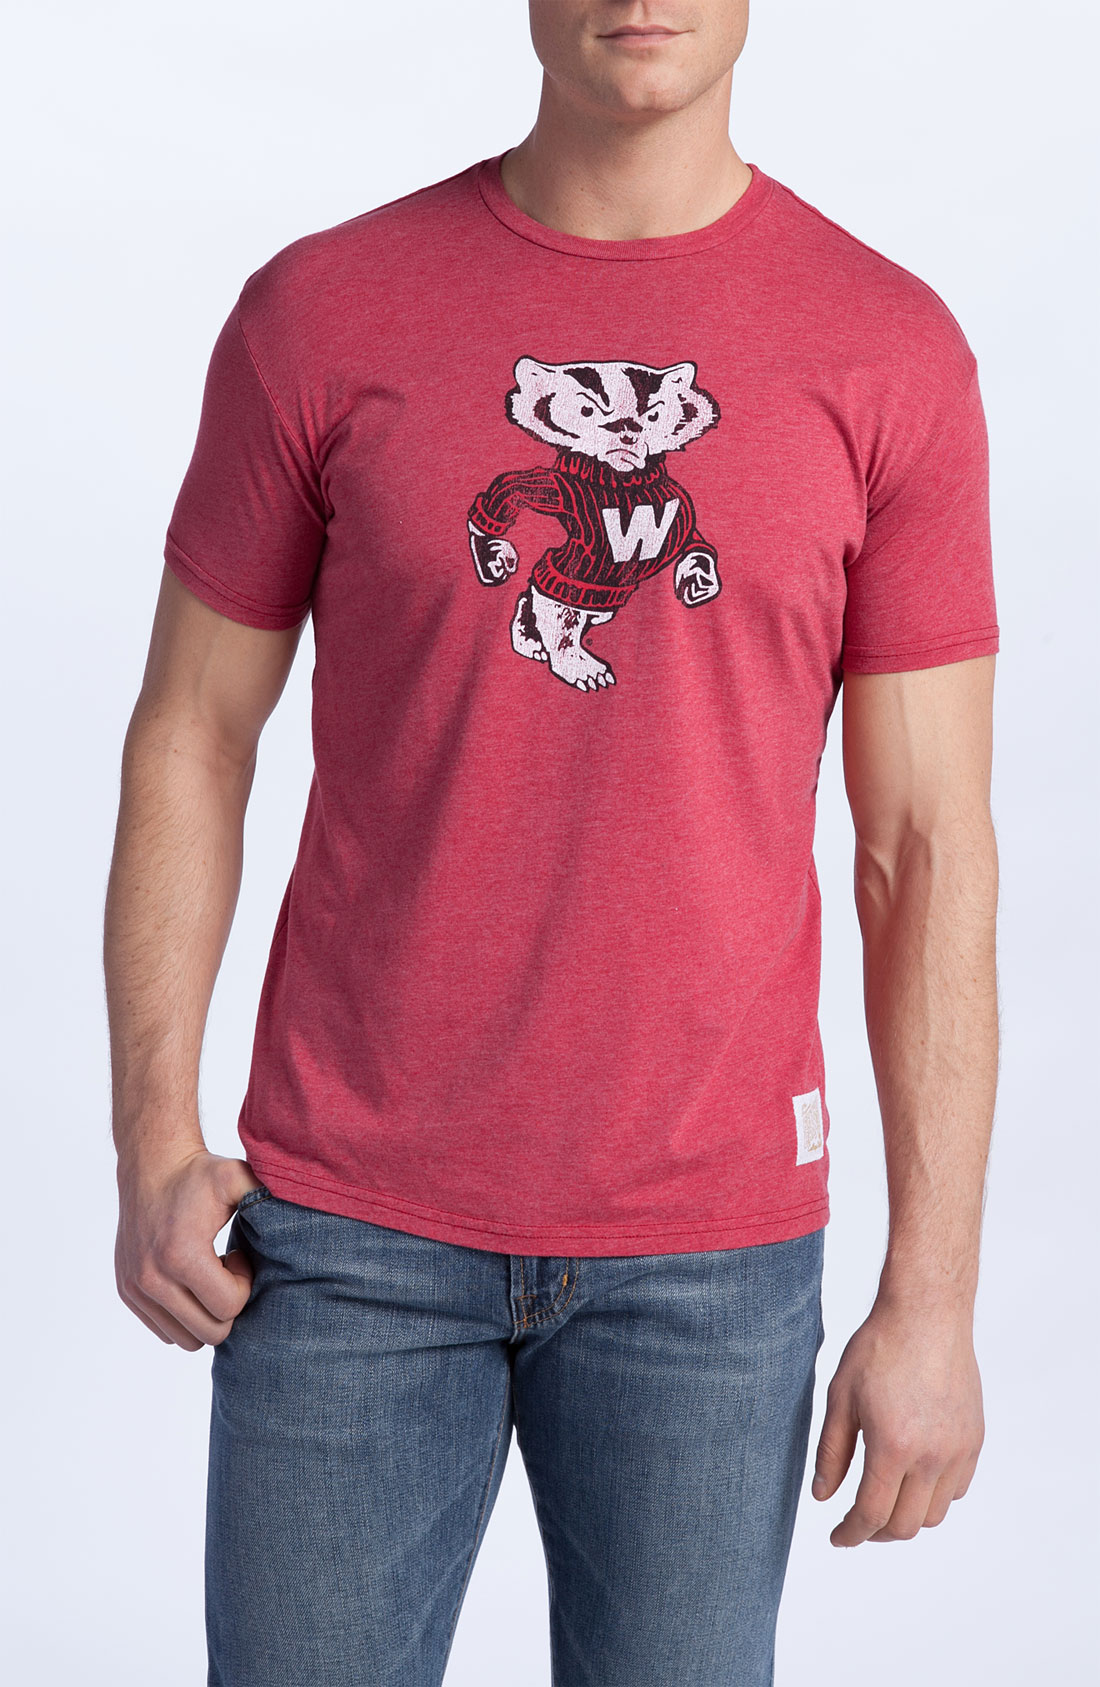 The Original Retro Brand Wisconsin Badgers Tshirt in Red for Men